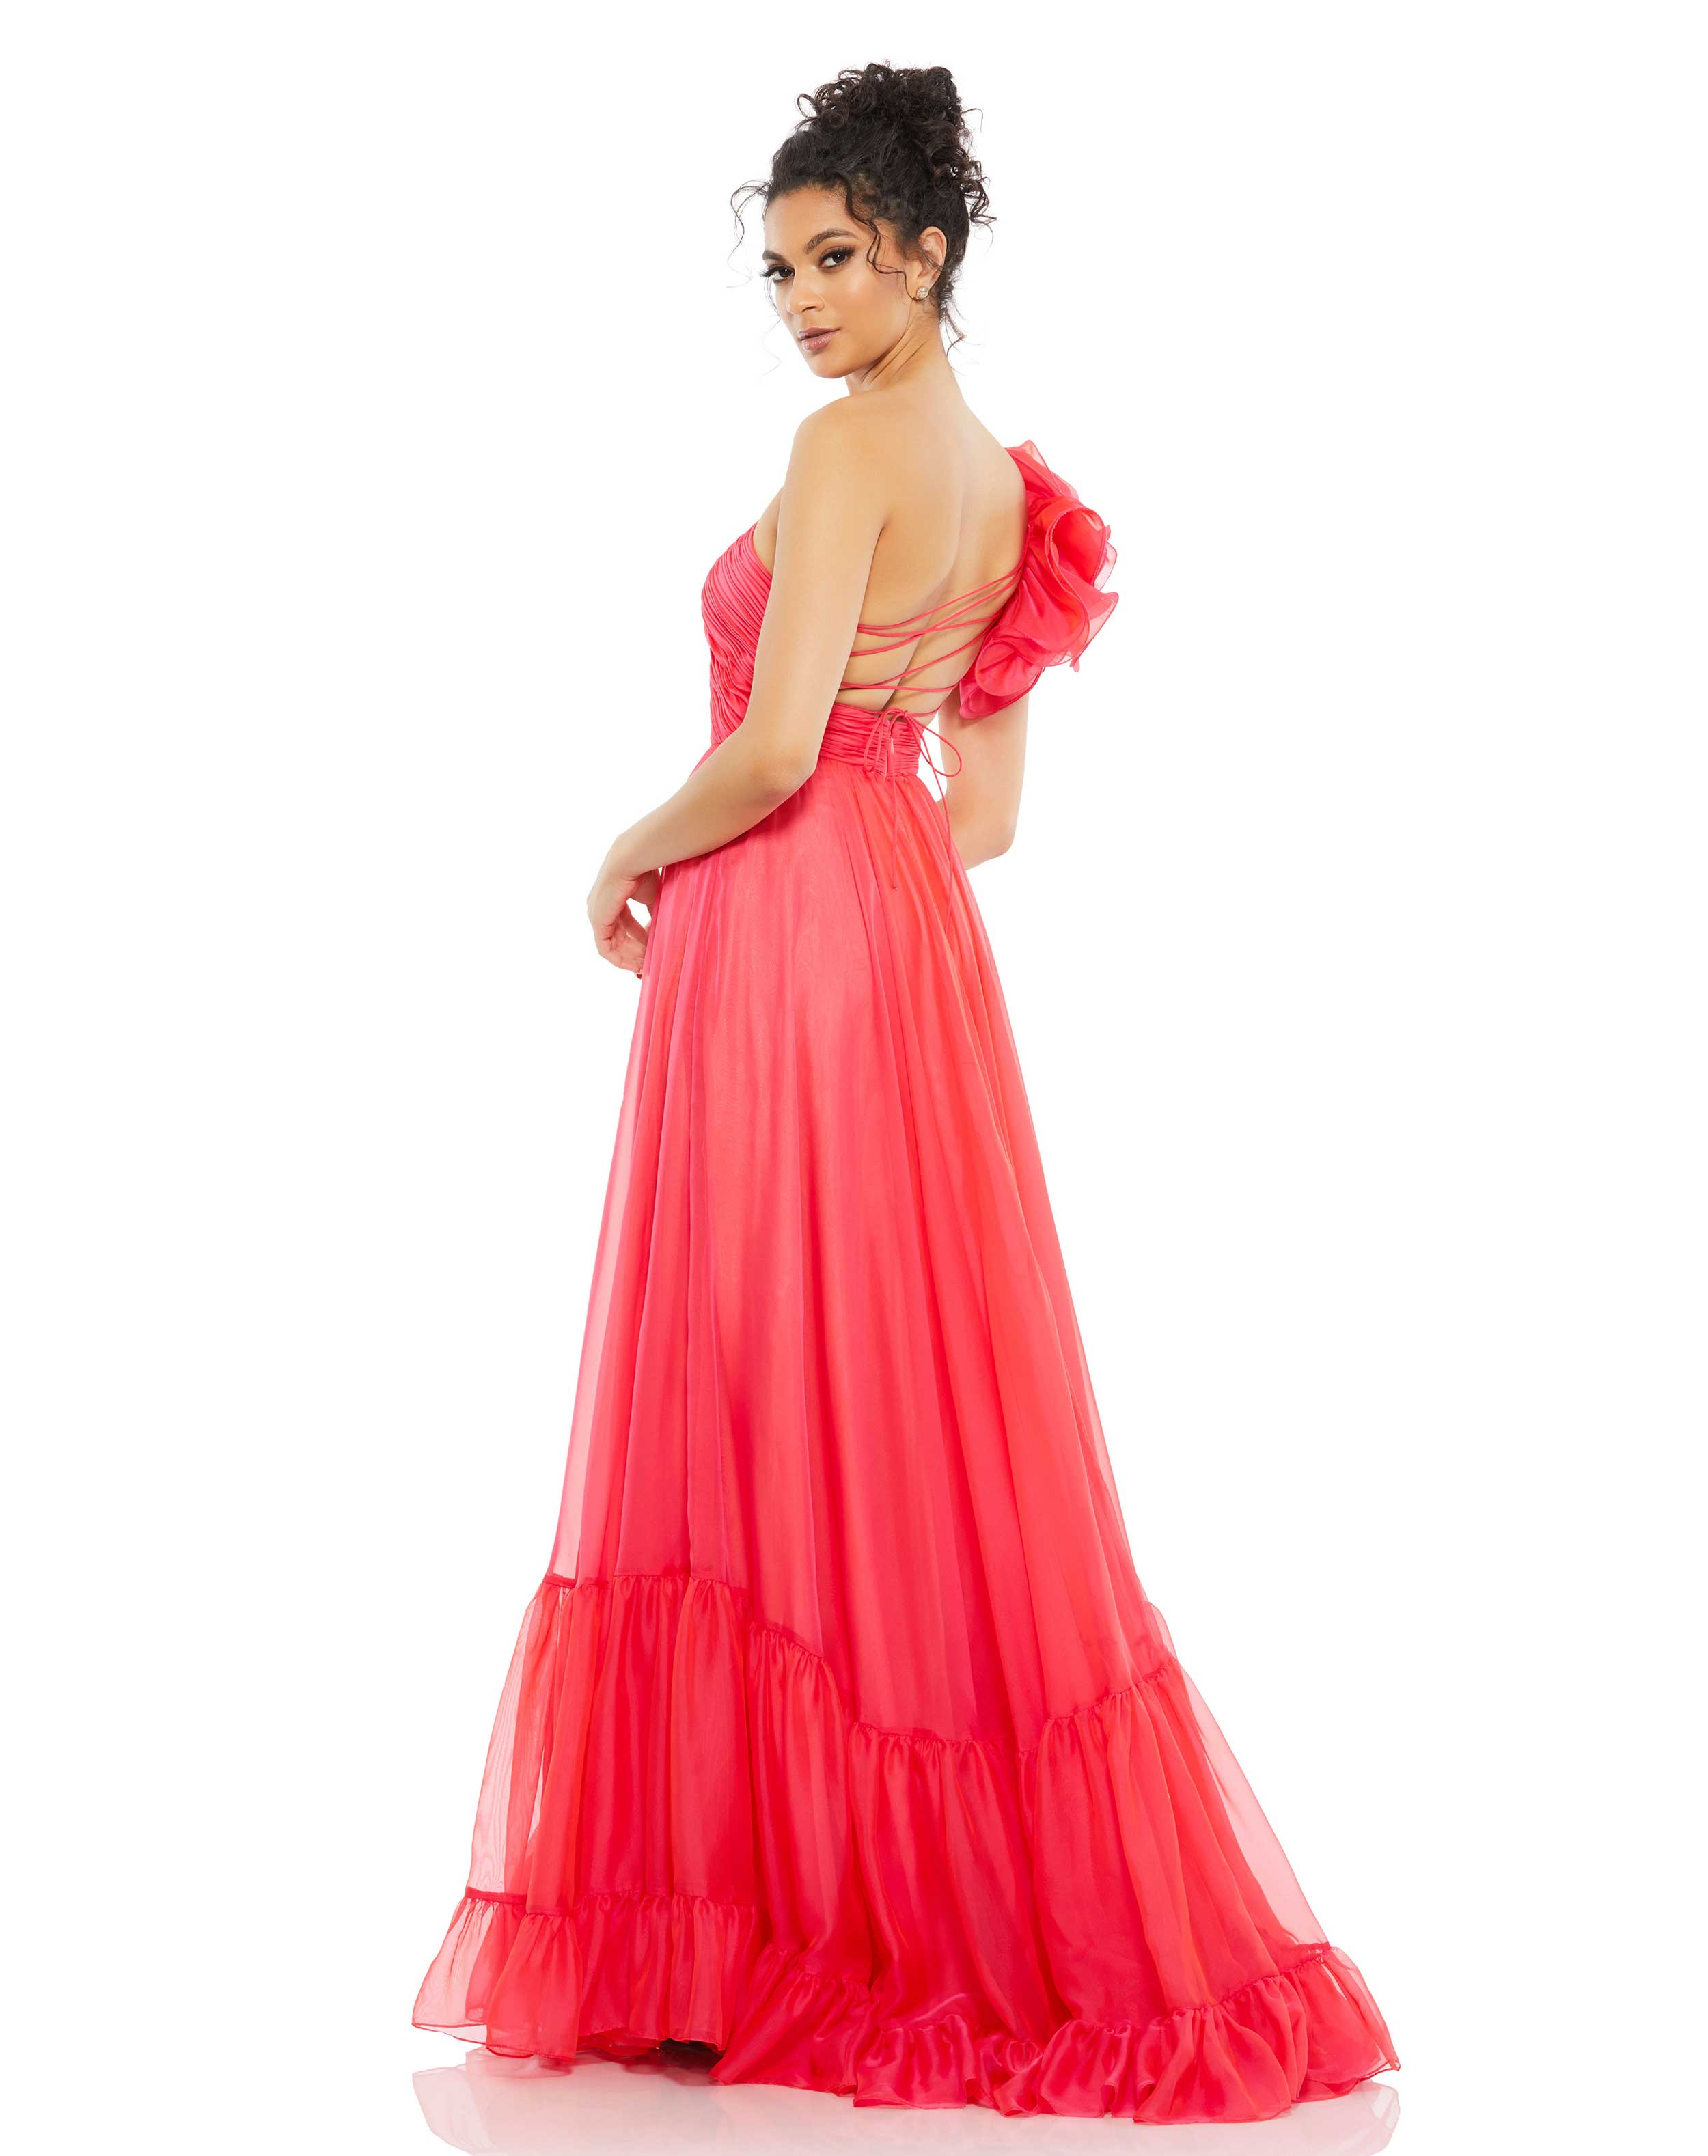 Formal Dresses Long Ruffle Tiered Strappy Back Formal Dress Hot Pink